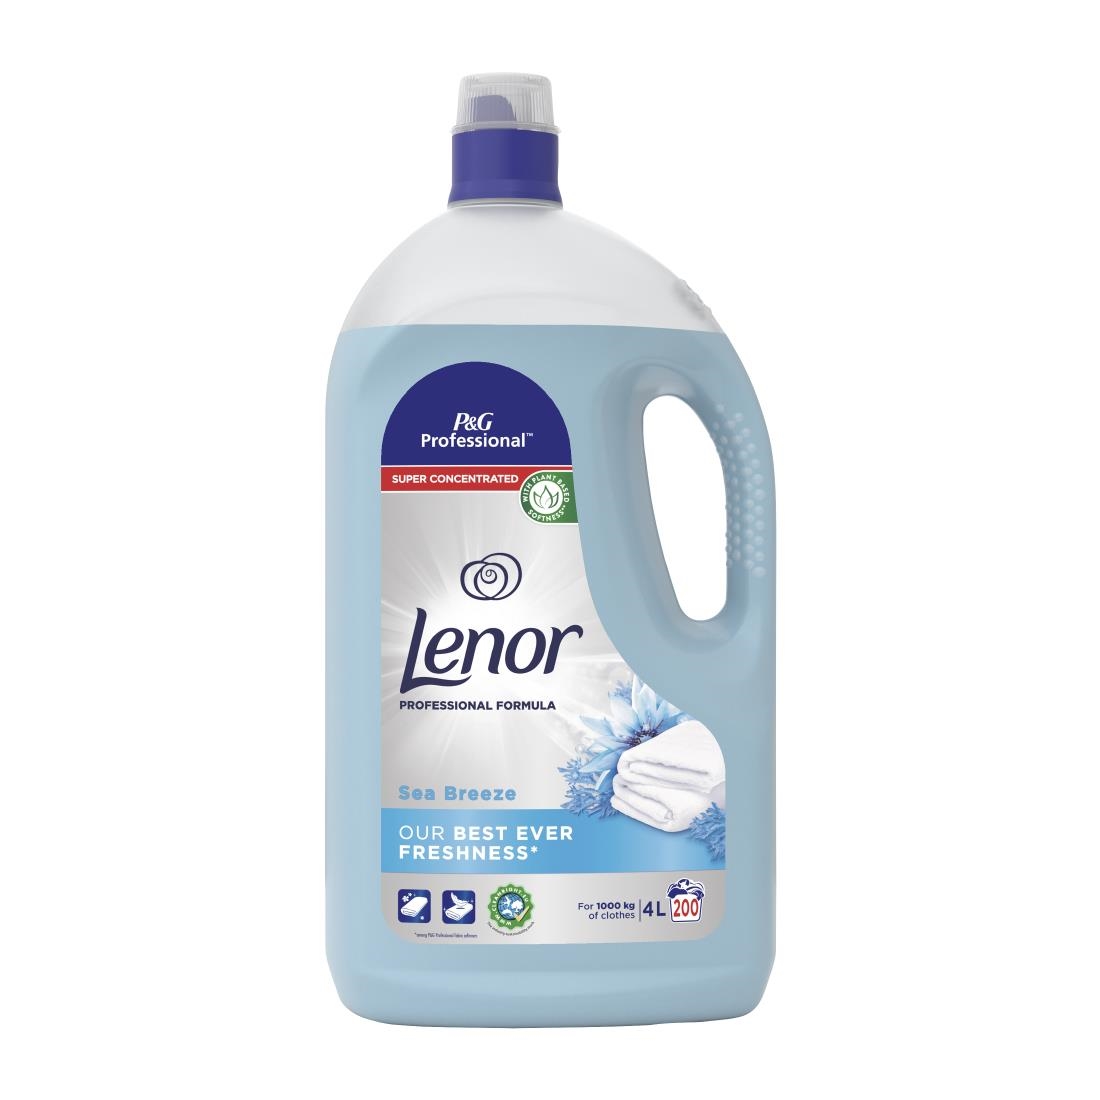 Lenor Professional Fabric Conditioner Sea Breeze 4Ltr Pack of 3 (DZ453)